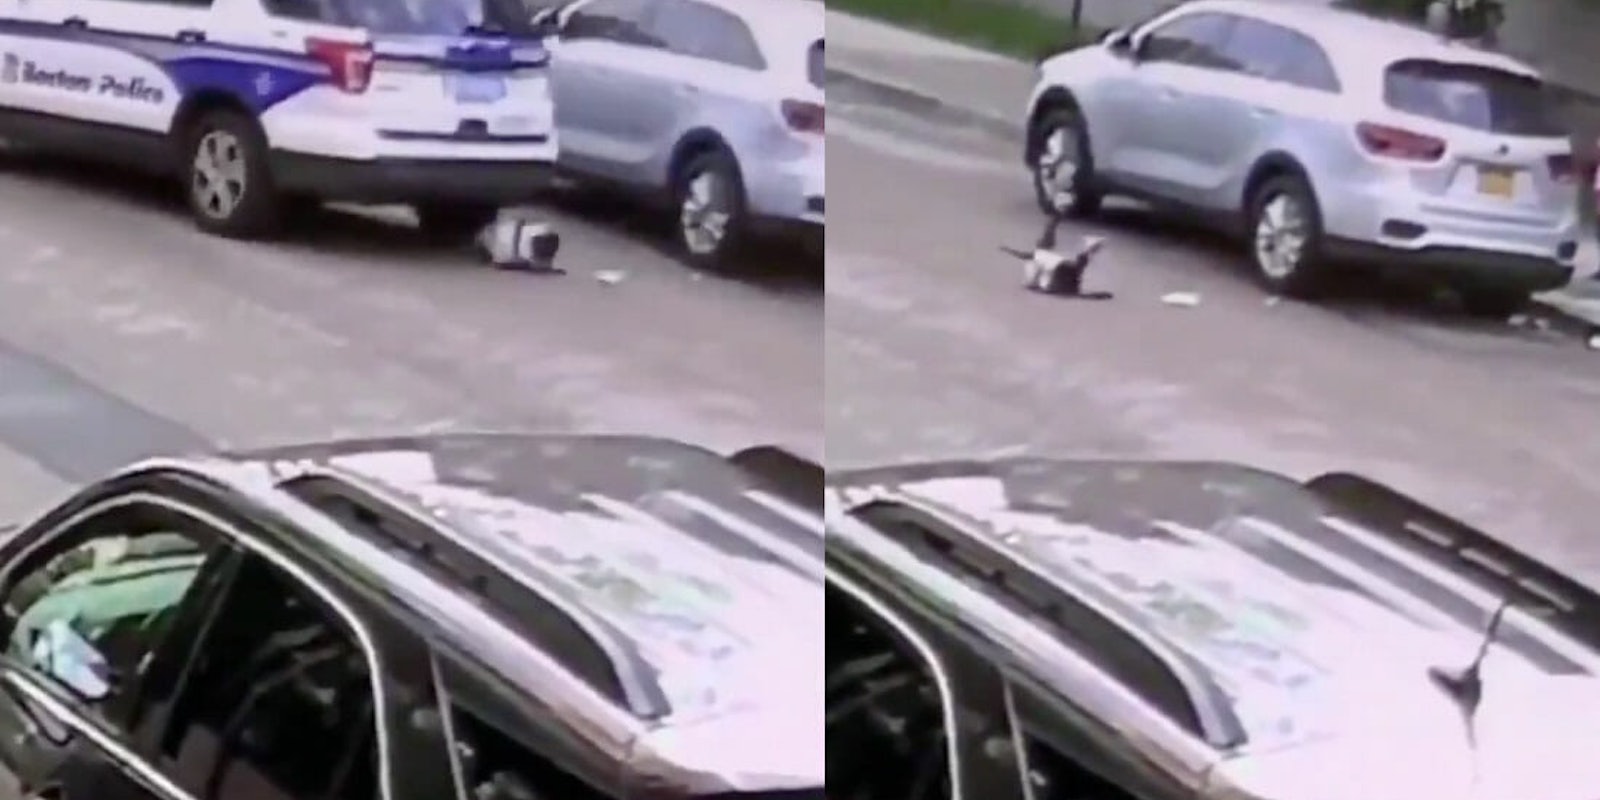 Screengrabs from surveillance video shows the 1-year-gold under the Boston police car; a second screengrab shows the toddler on the street after the car has run her over